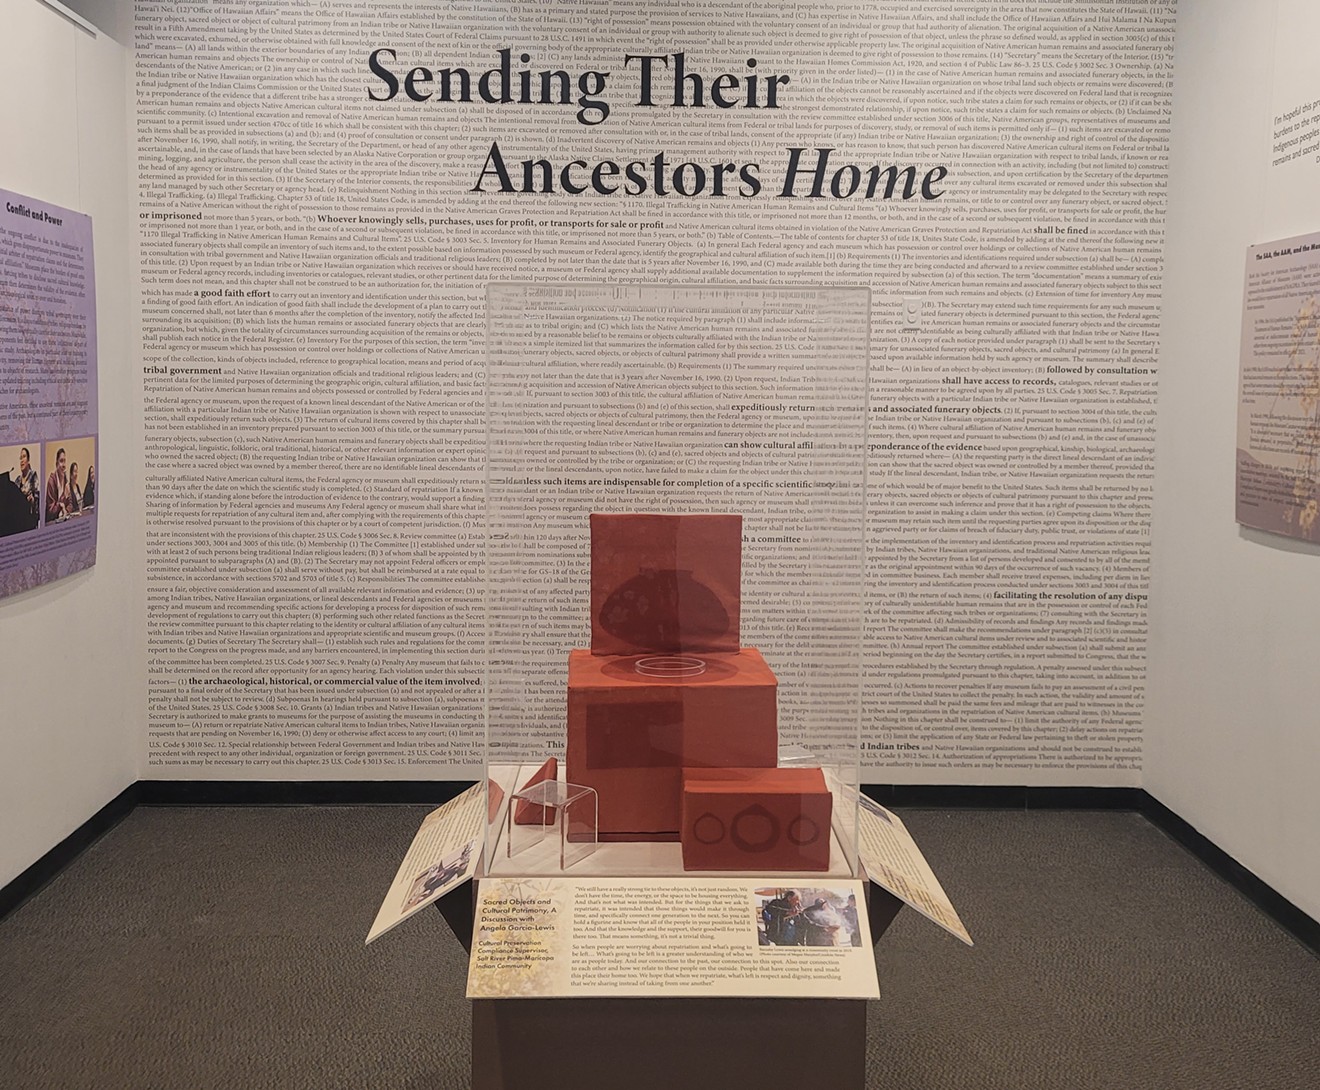 The only visual in the exhibit on "Sending Their Ancestors Home" is a representation of how a display might look after items are repatriated.